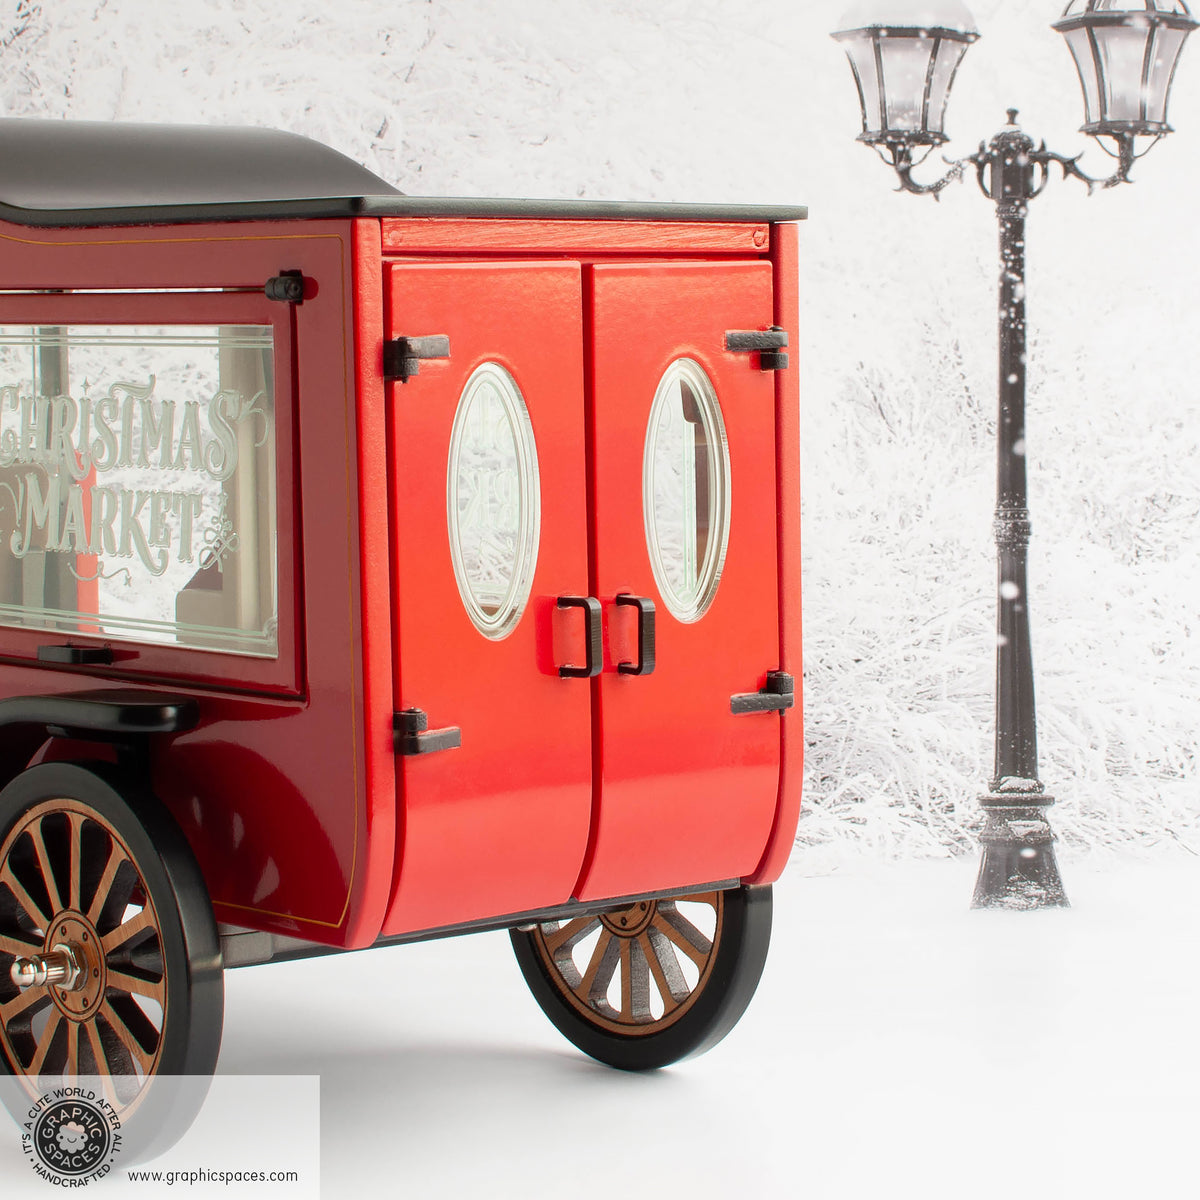 1:12 Scale Room Box Red Christmas Market Truck Model T C Cab. Detailed rear view with doors closed.